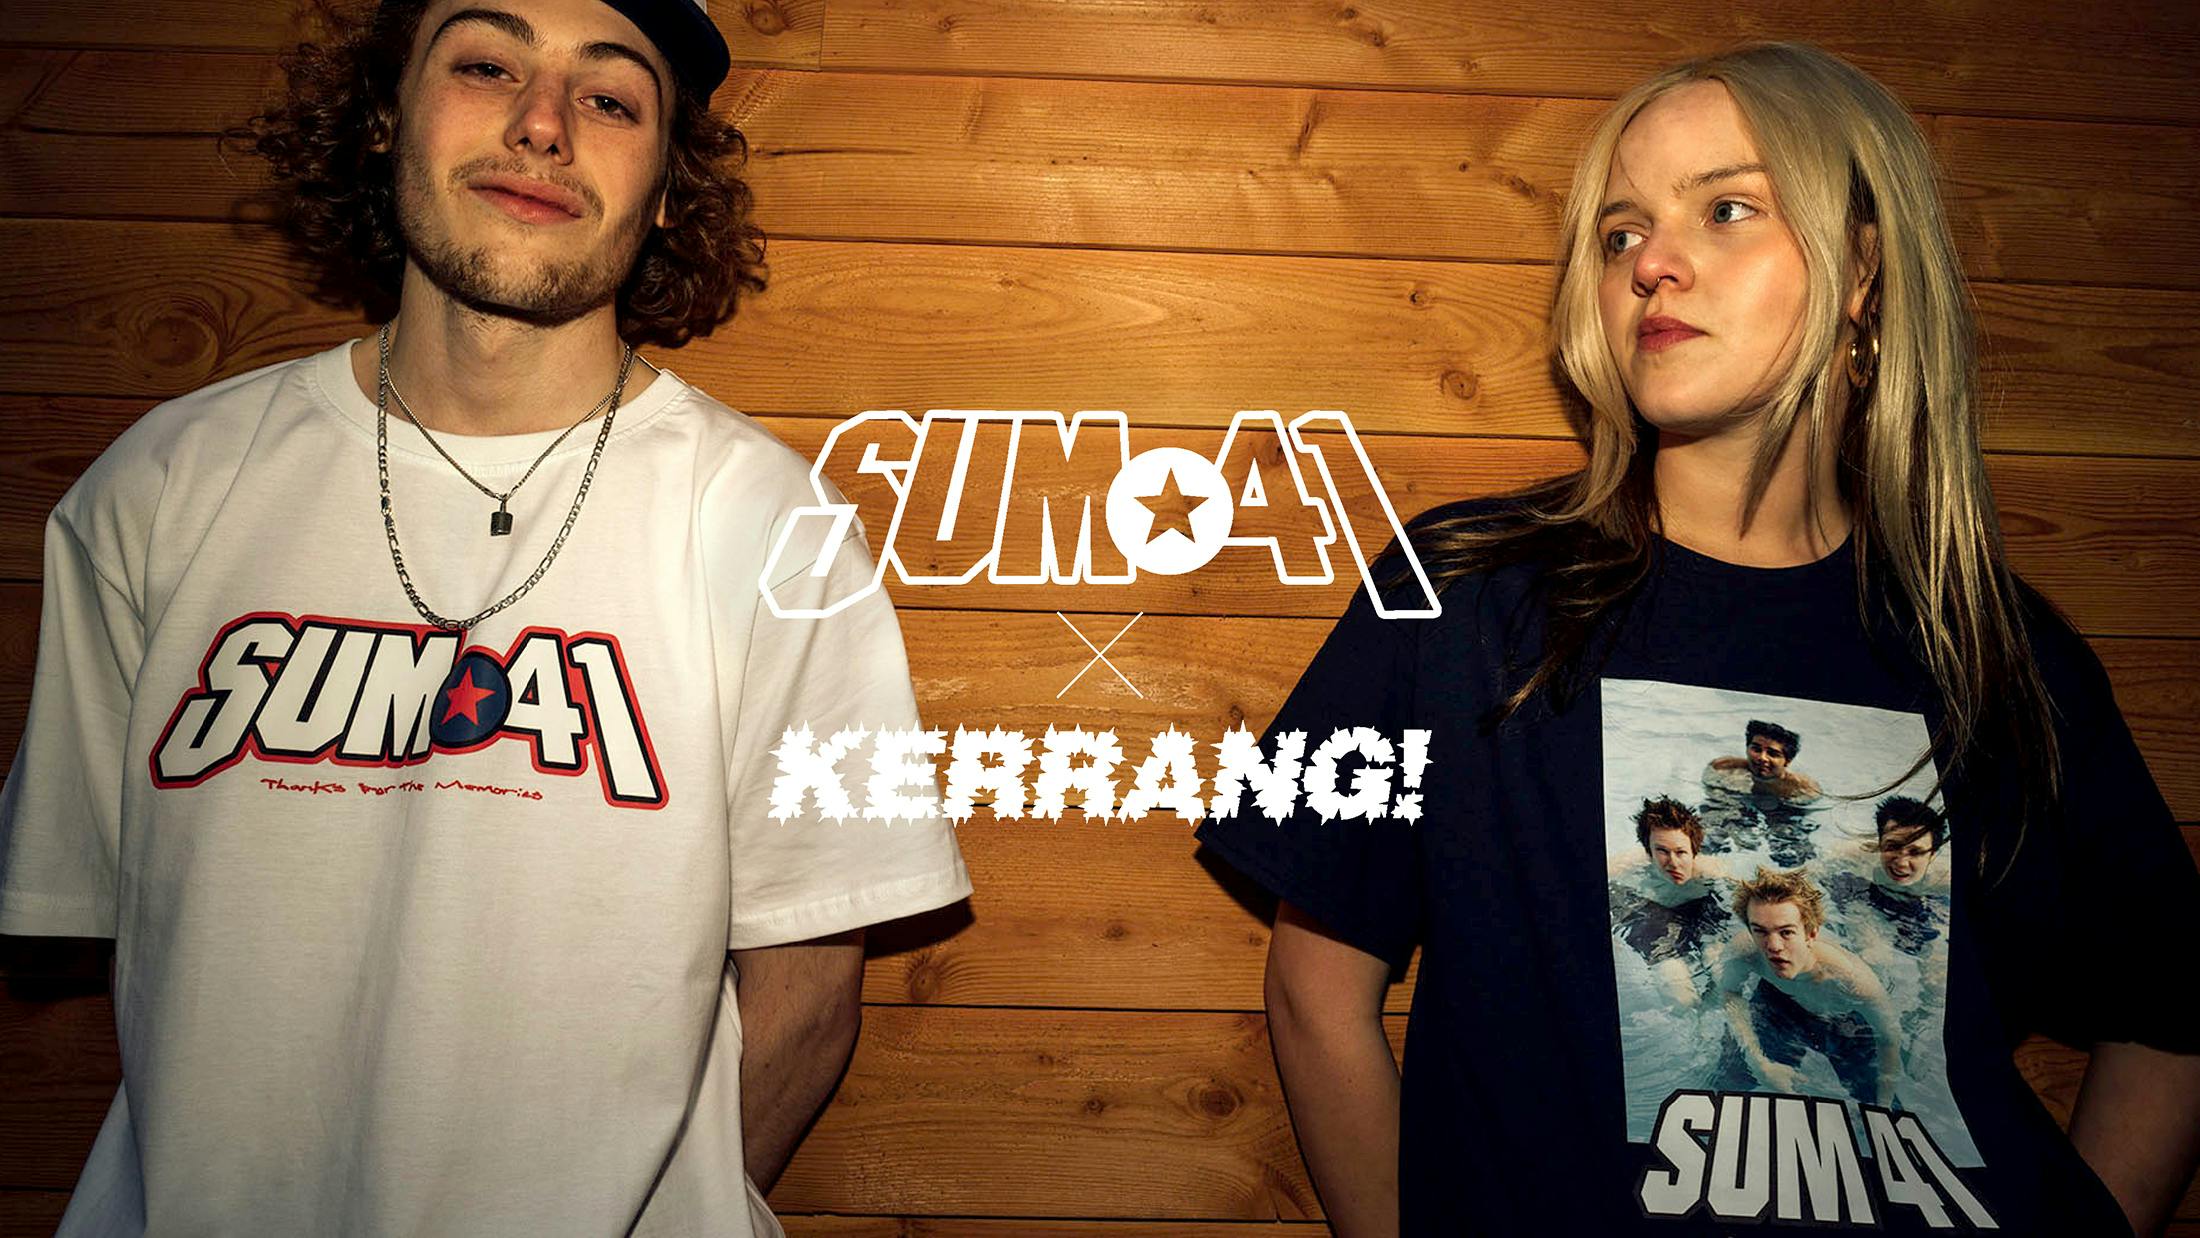 Check out the new Kerrang! x Sum 41 capsule collection